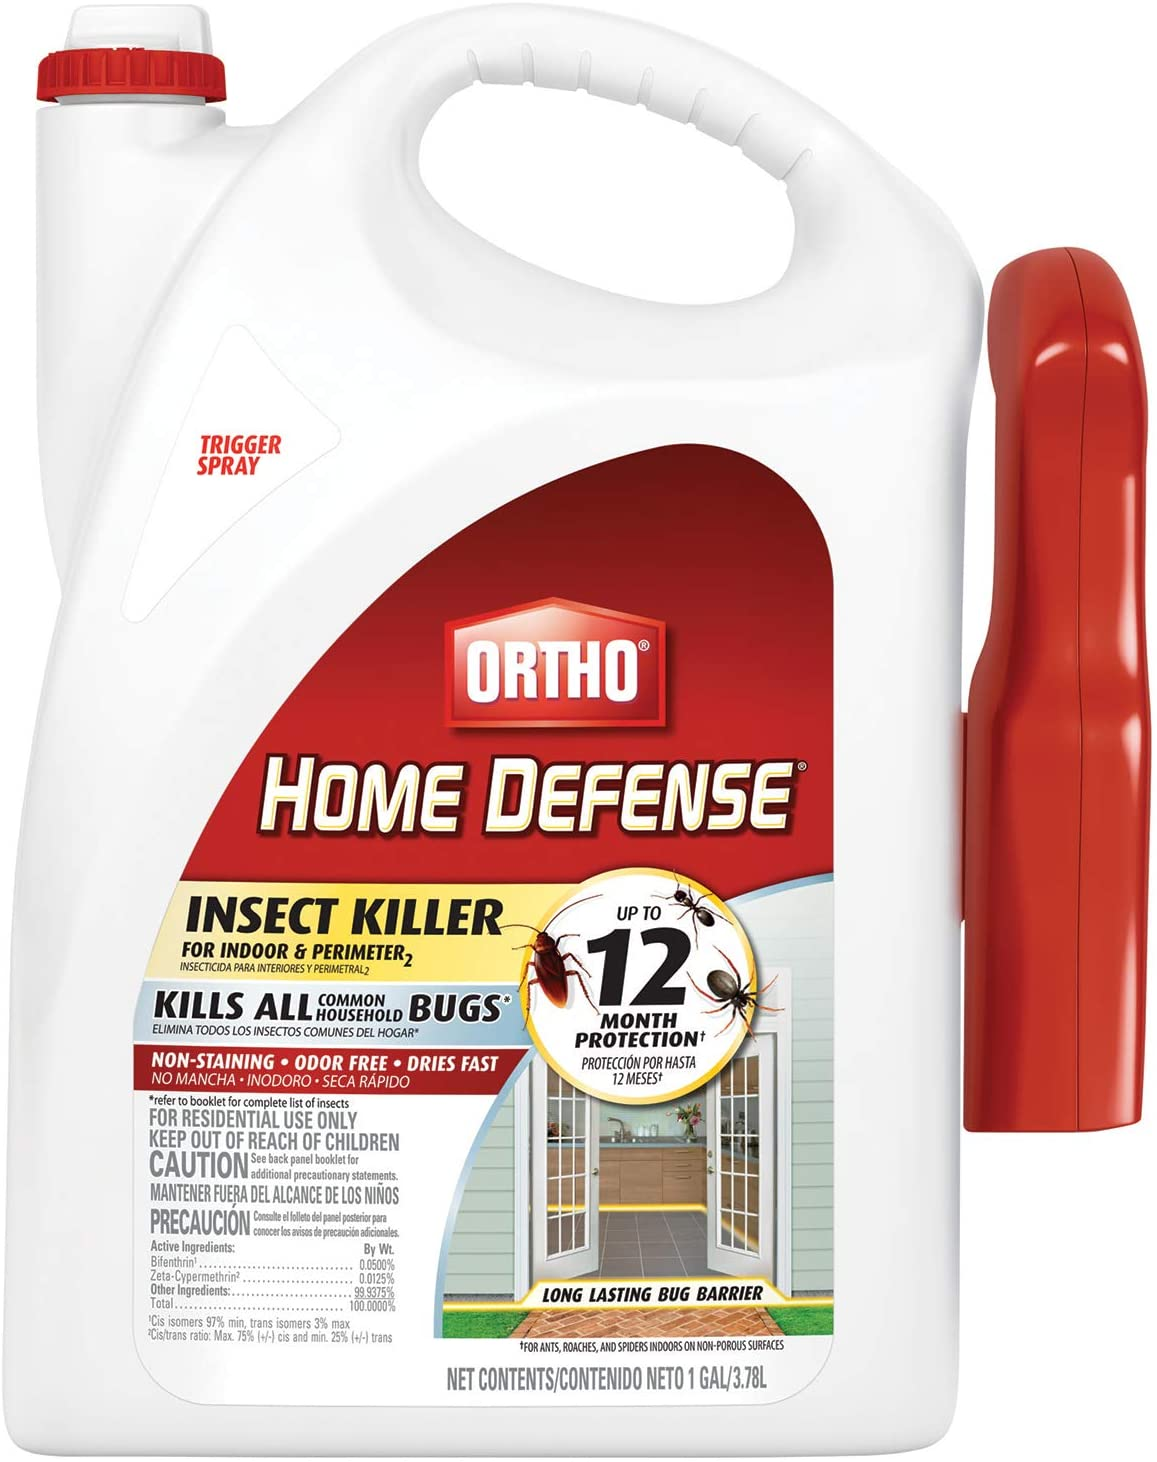 Ortho Home Defense Insect Killer for Indoor & Perimeter2: with Comfort Wand, Kills Ants, Cockroaches, Spiders, Fleas & Ticks, Odor Free, 1.1 Gal.